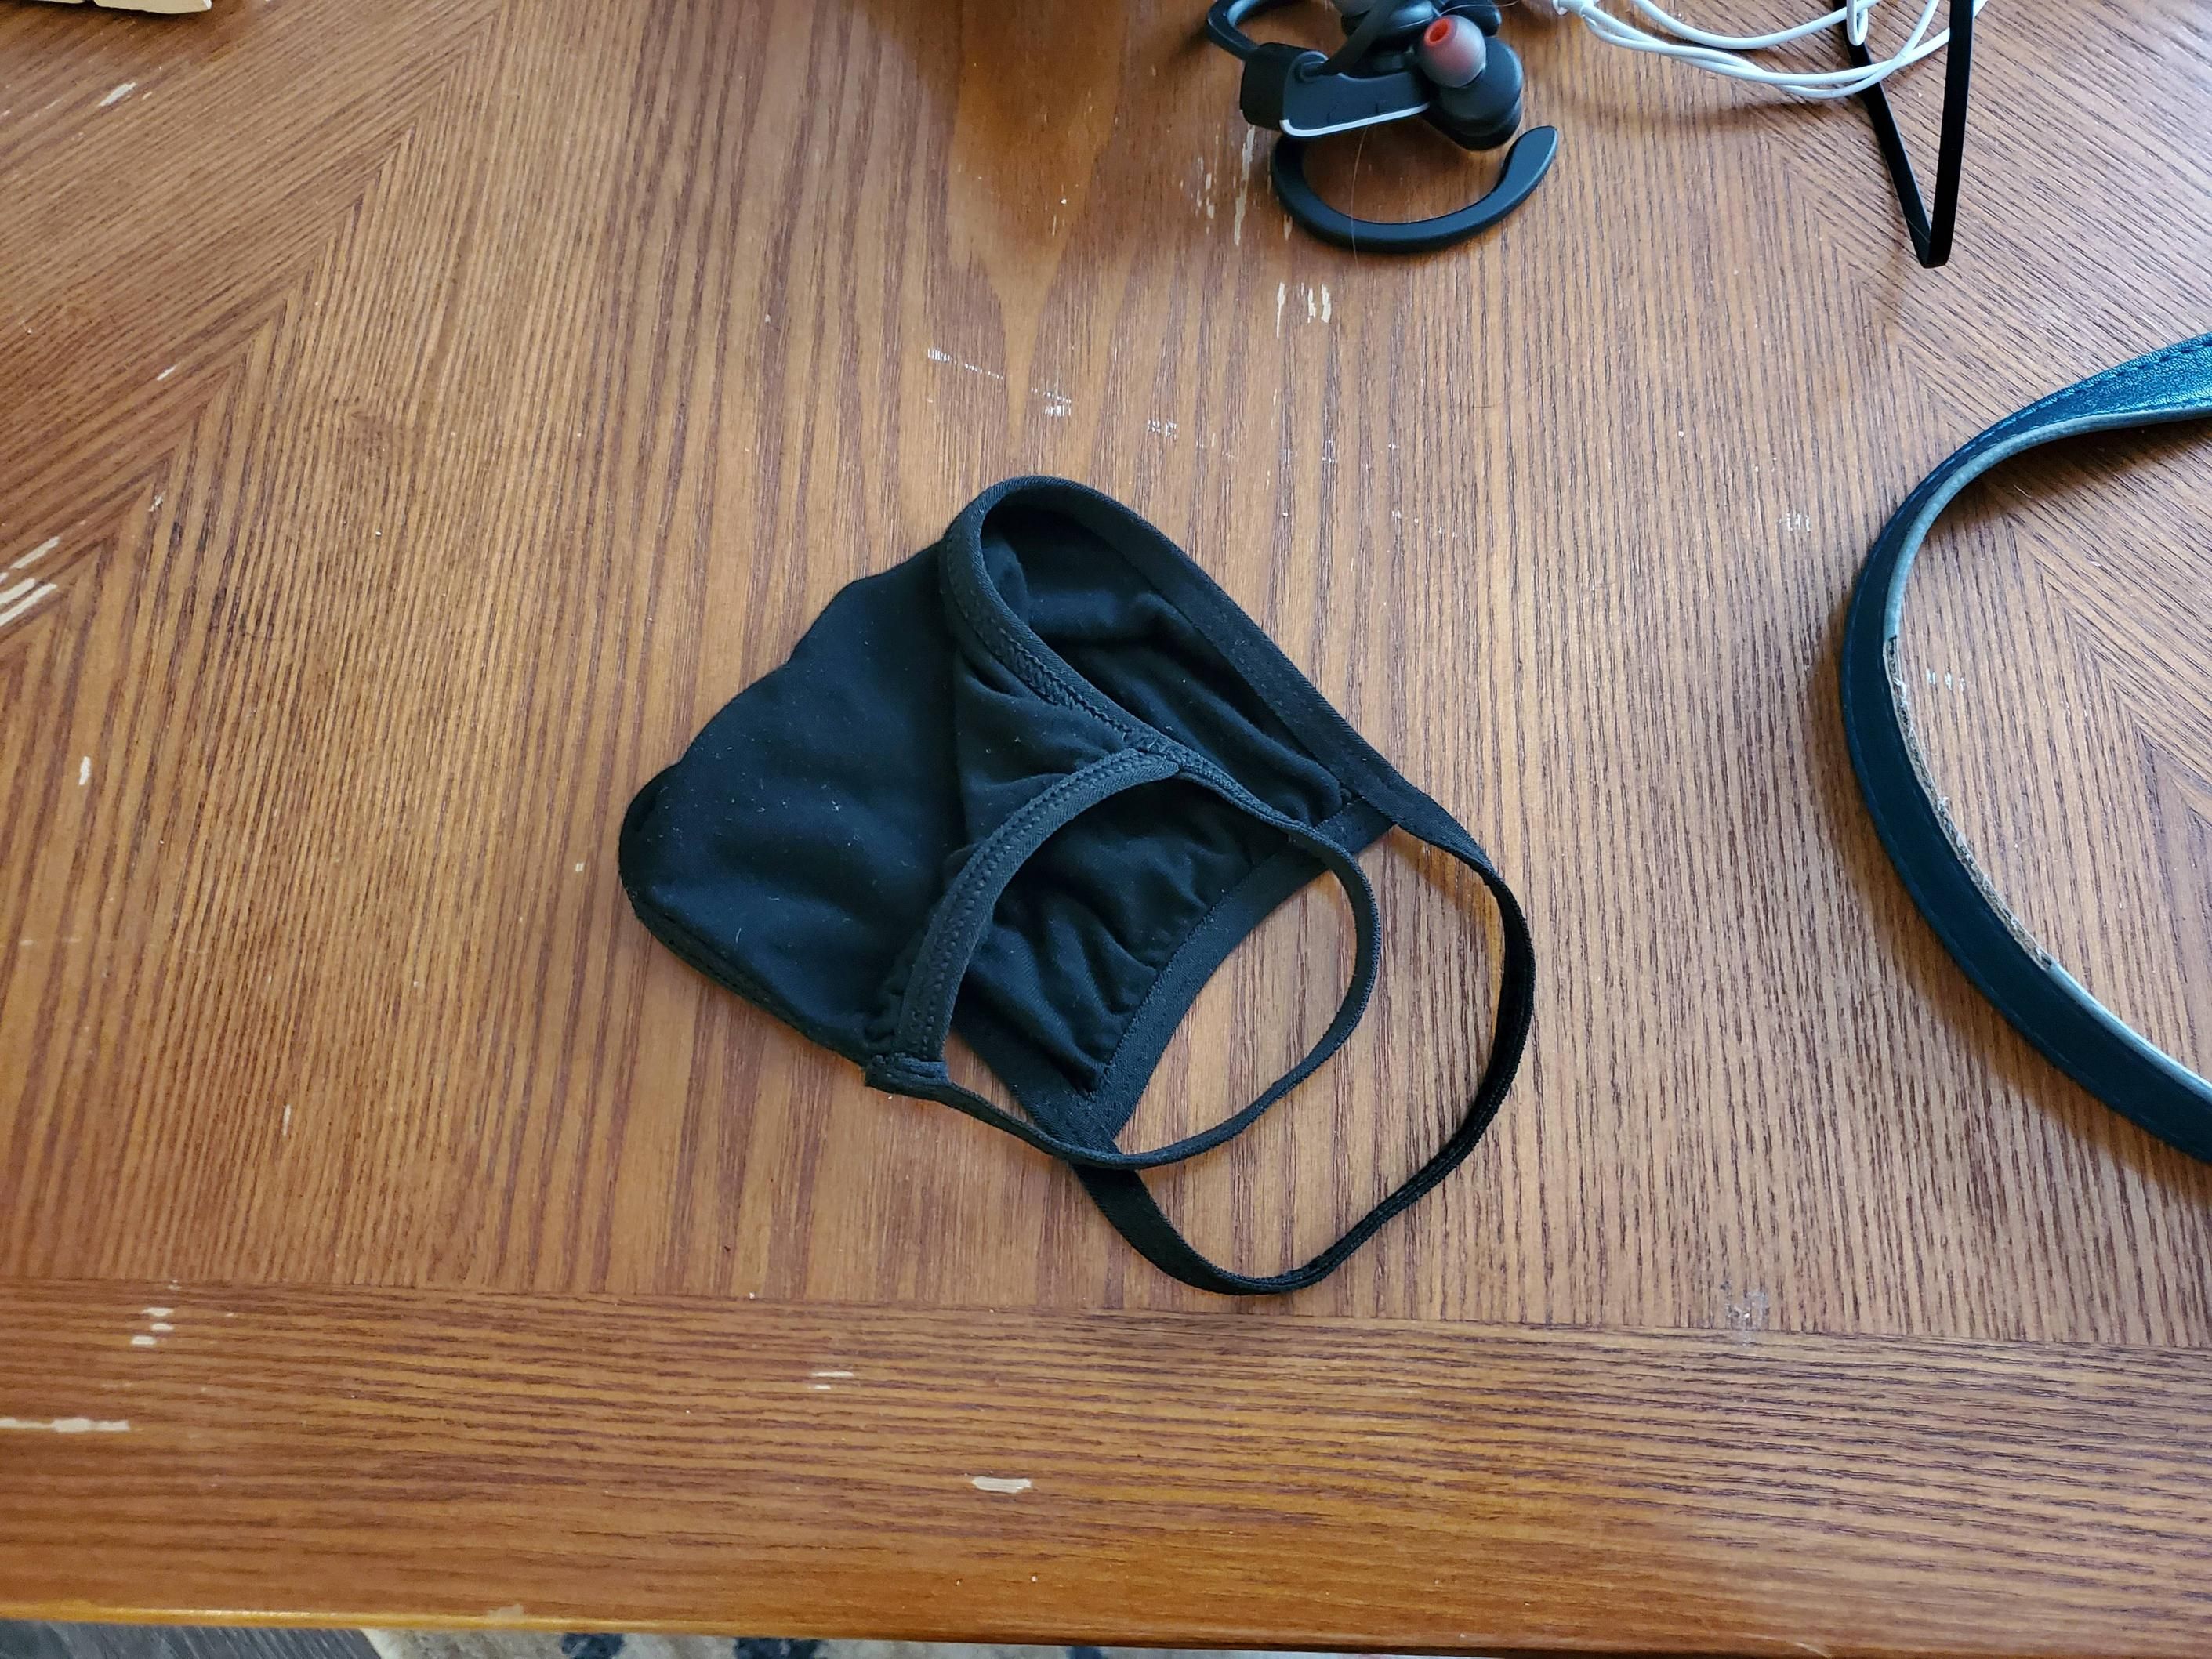 My mother got embarrassed when she "found my girlfriends panties" on our kitchen table